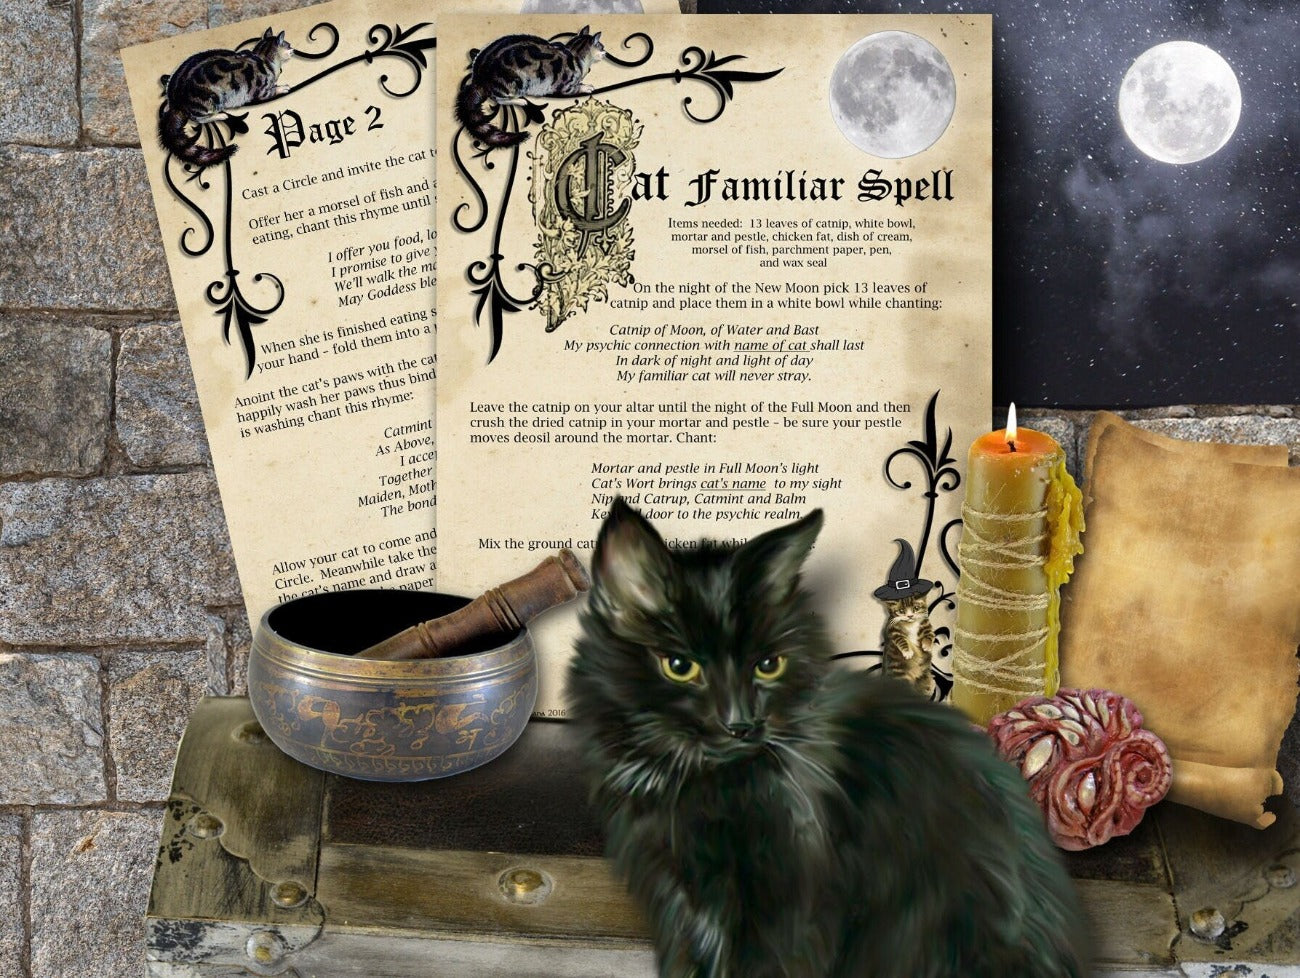 SPELLS Bundle, Spells of Witchcraft, Witch Book of Shadows, Baby Witch Bundle DIY, Guide to Witchcraft, - Morgana Magick Spell